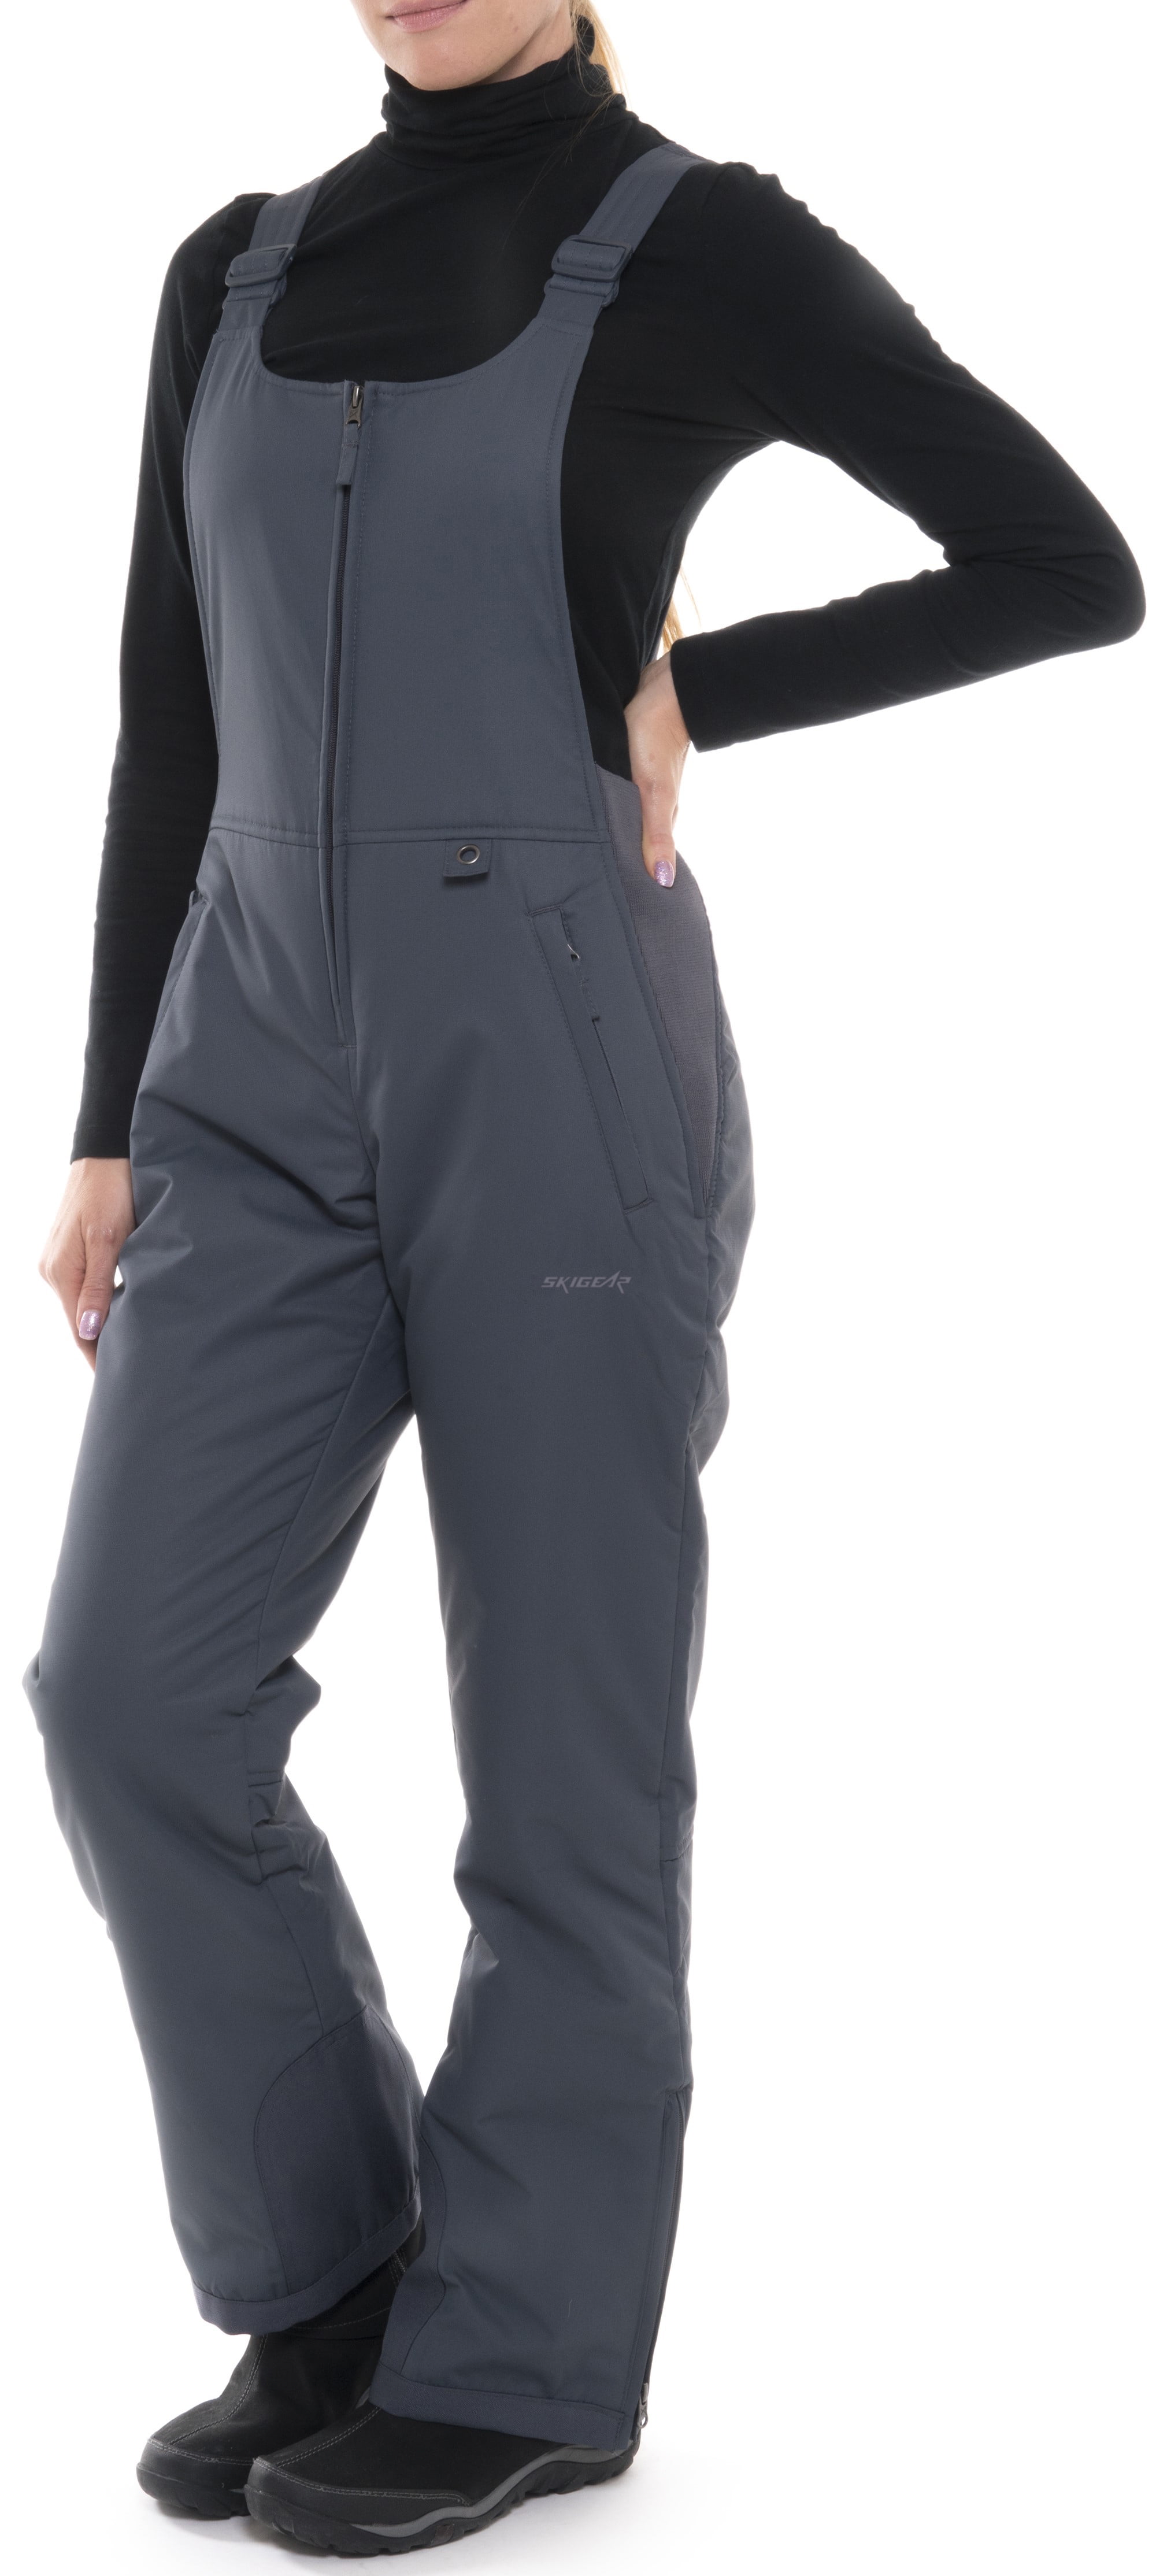 SkiGear by Arctix Women's and Plus Size Winter Snow Bib Overall Pant